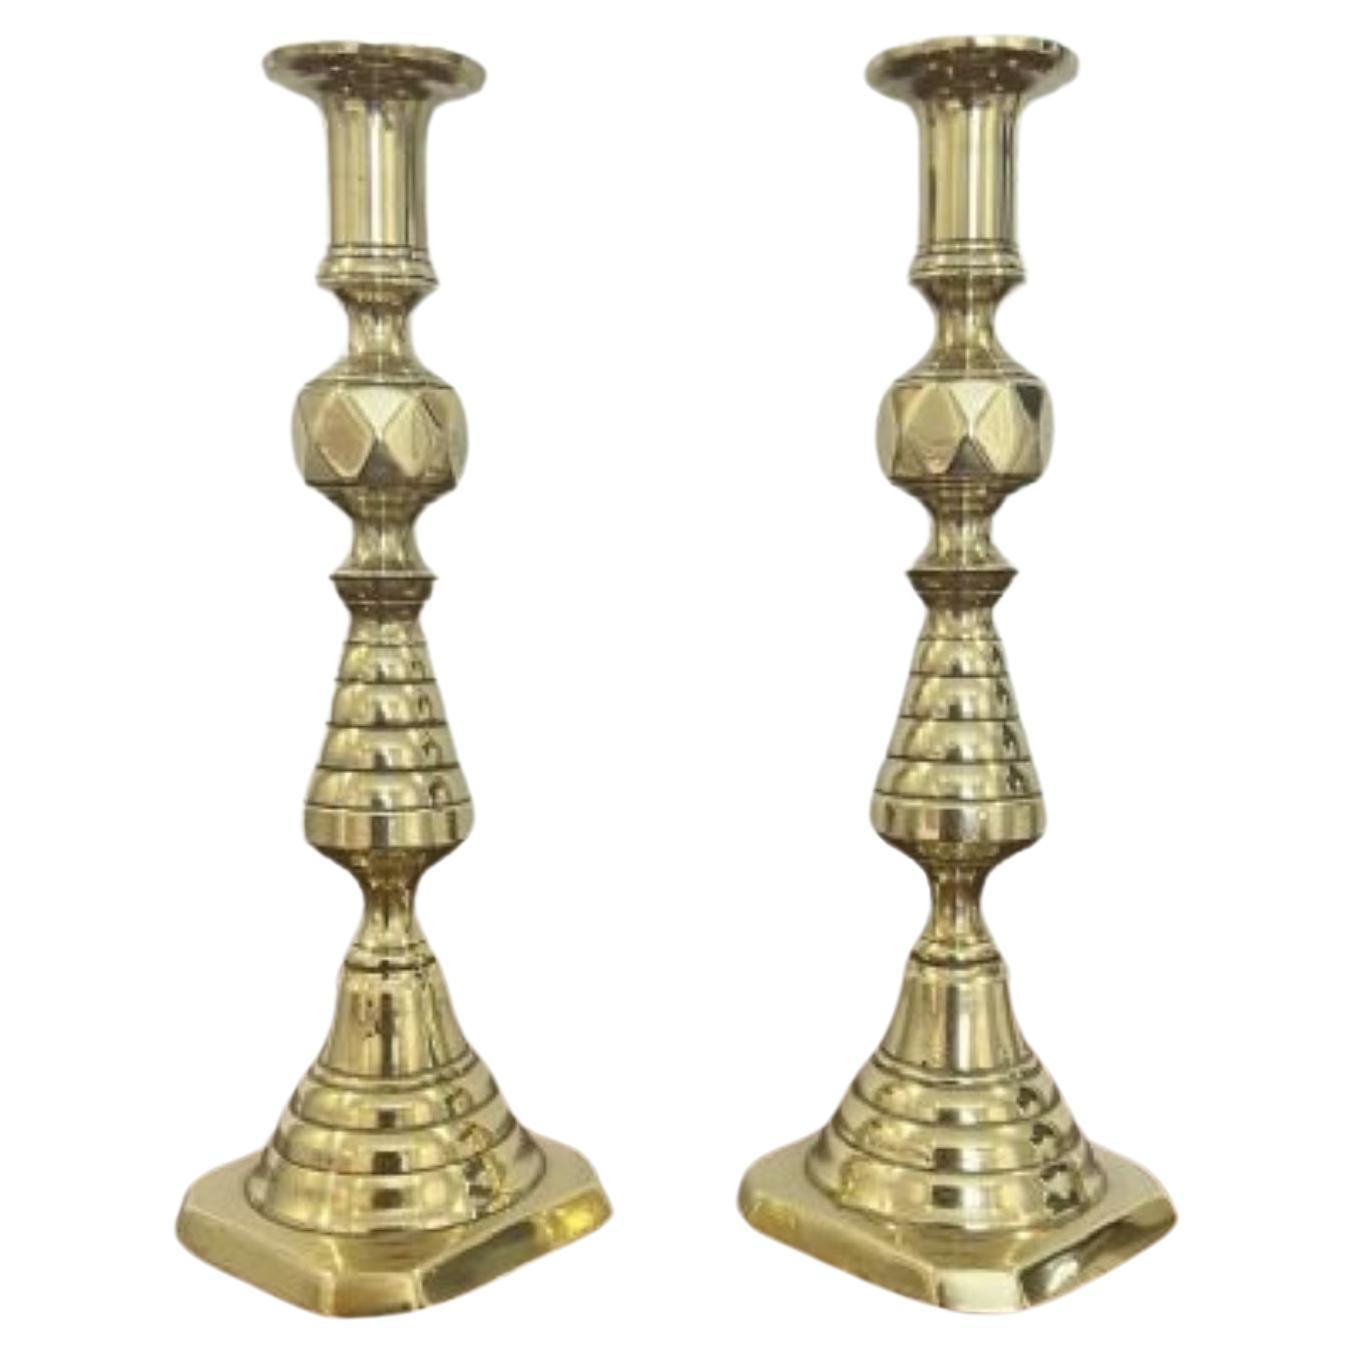 Quality pair of antique Victorian brass candlesticks 